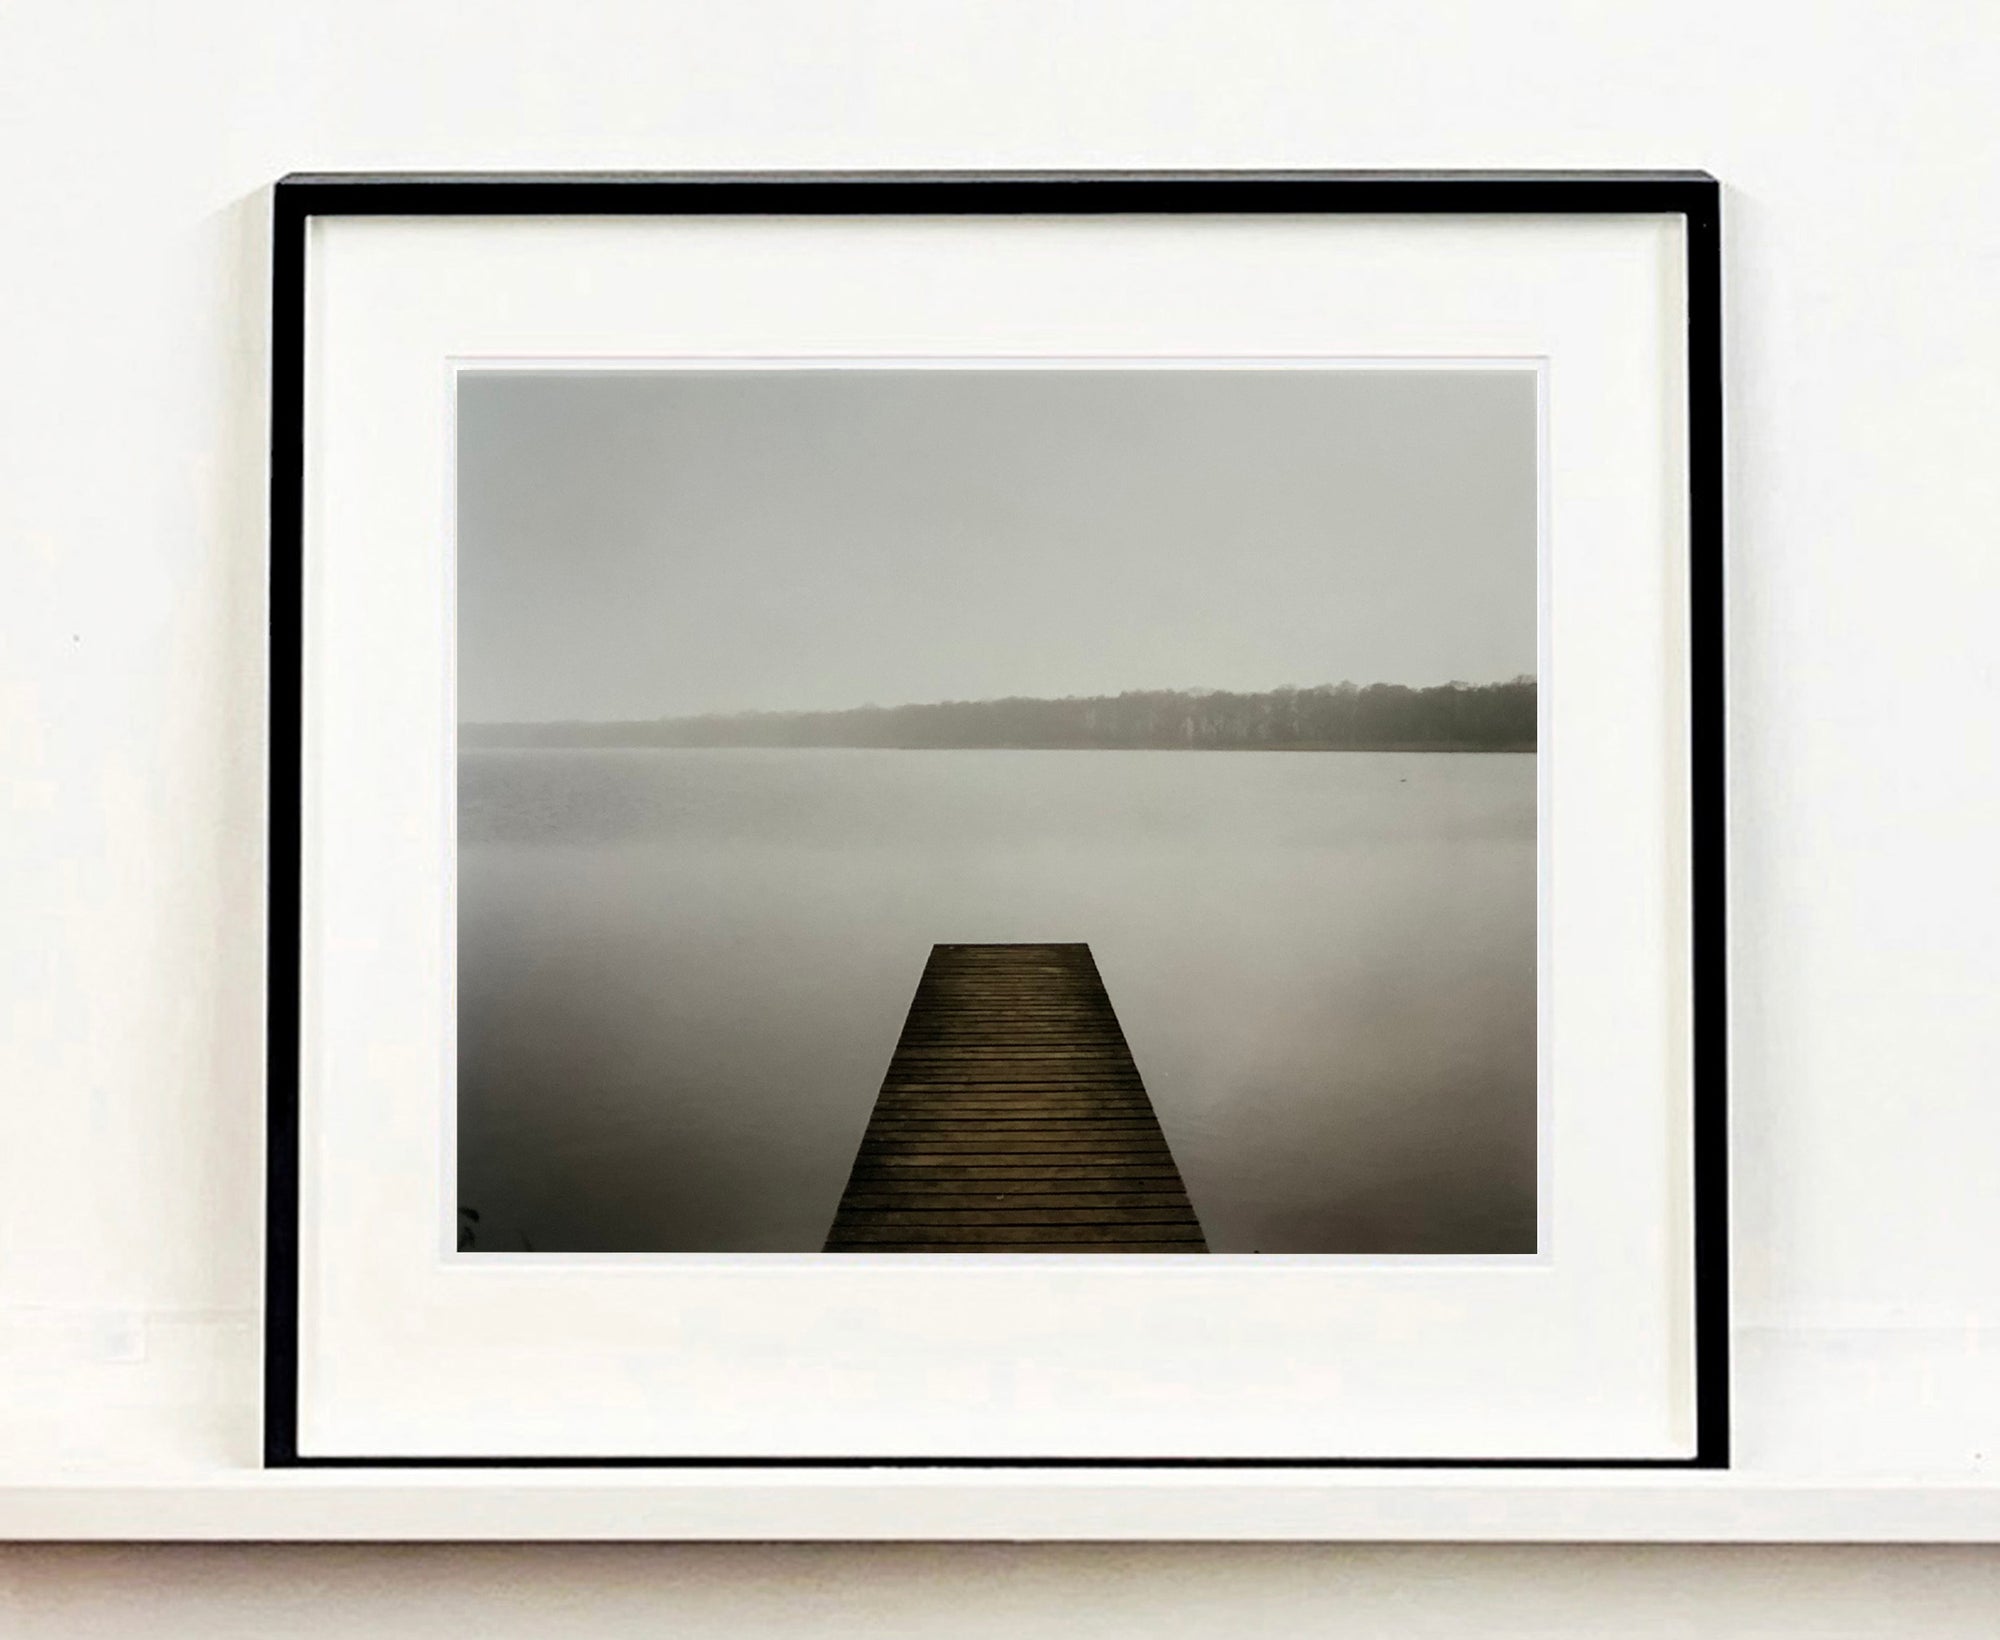 Richard shot 'Barton Broad' in one of his favourite areas of Britain on the east coast in Norfolk. This peaceful almost monochrome landscape/waterscape creates a feeling of escapism from the hustle and bustle world. 